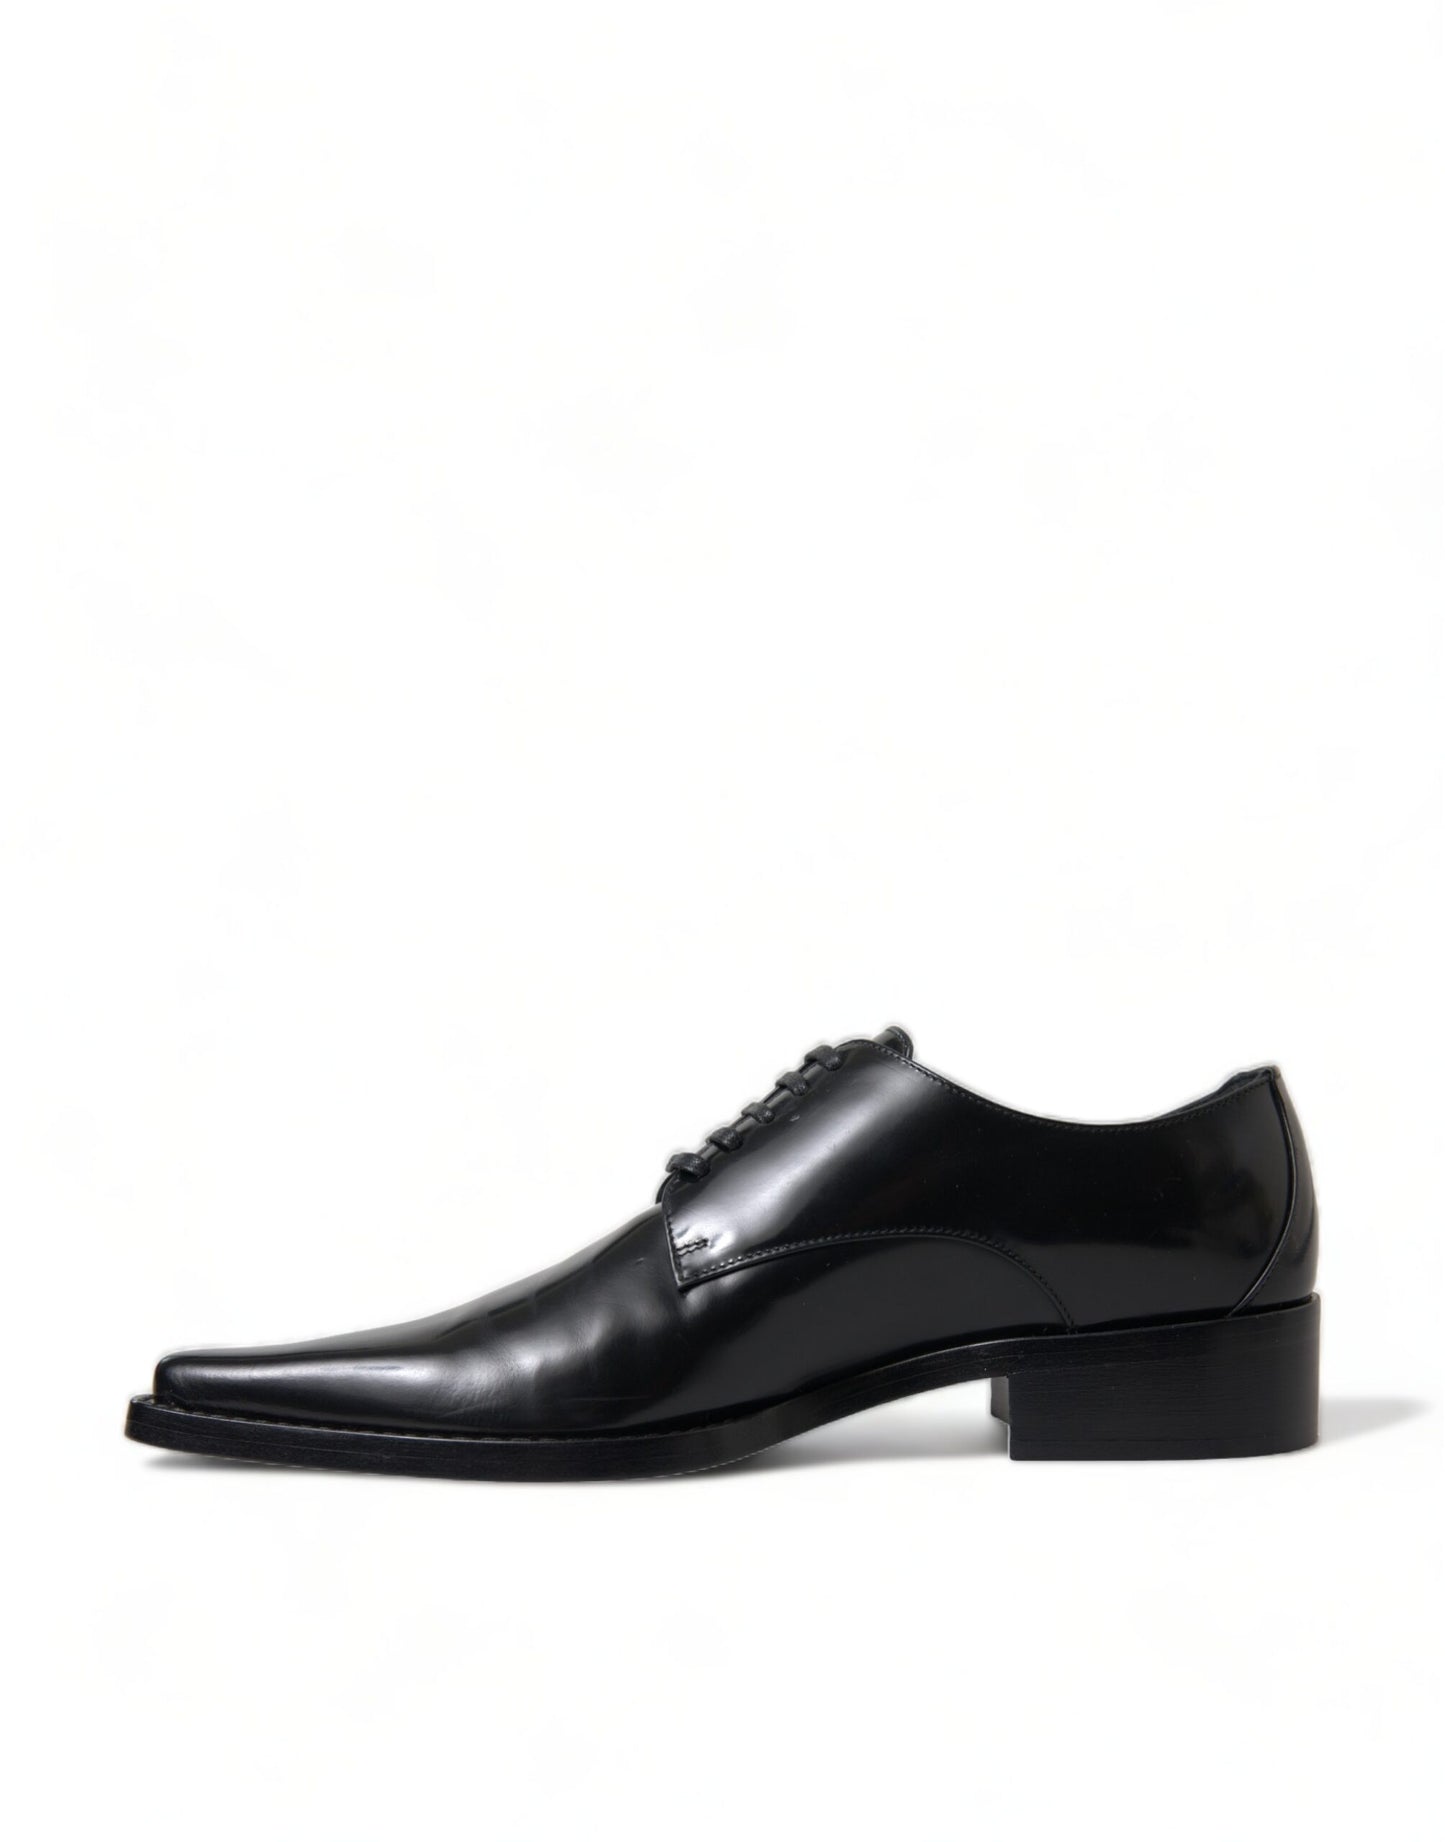 Dolce & Gabbana Black Leather Lace Up Formal Flats Shoes